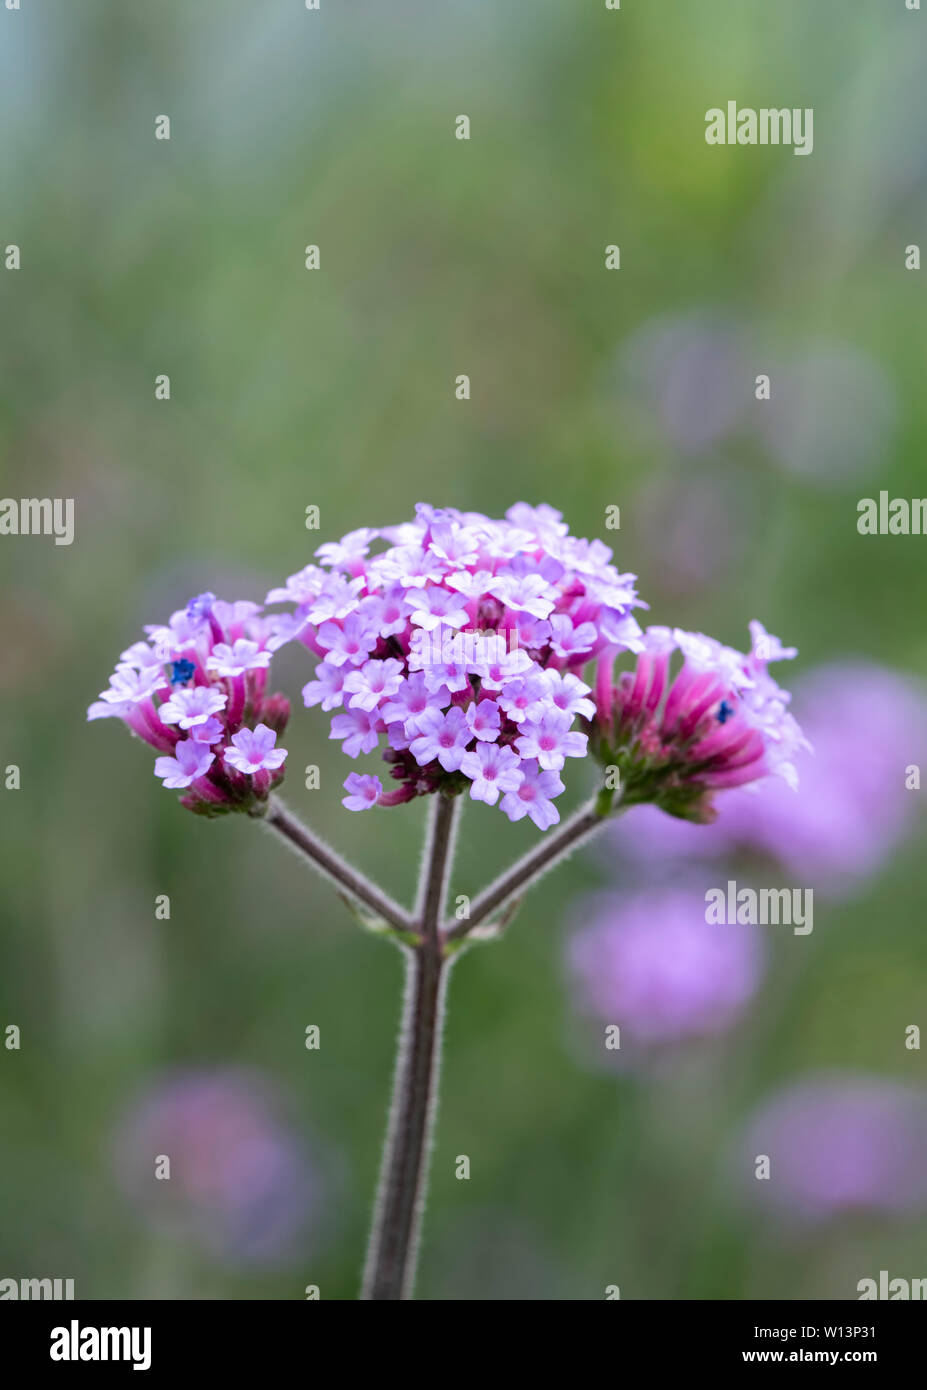 Mauve Verbena flower in full bloom, Verbena is very attractive to bees and butterflies Stock Photo